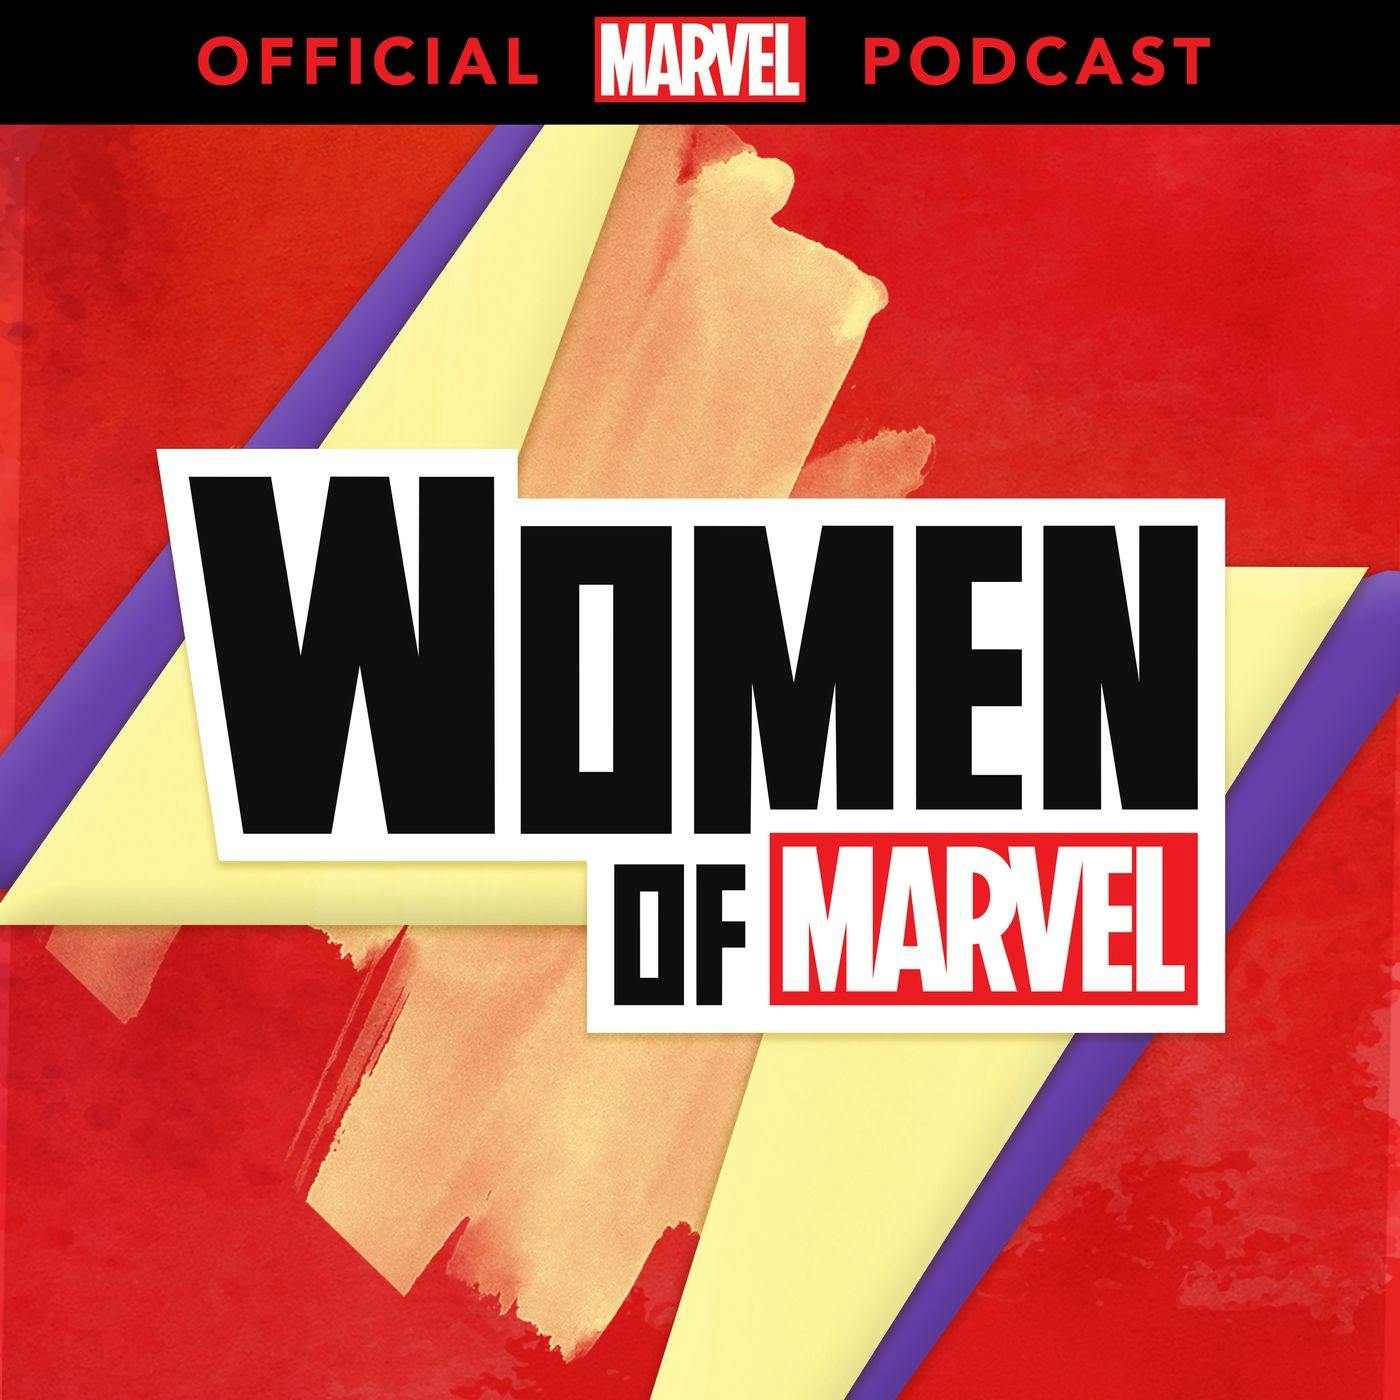 Ep 124 - Chloe Bennet & Ming-Na Wen from Marvel's Agents of S.H.I.E.L.D.